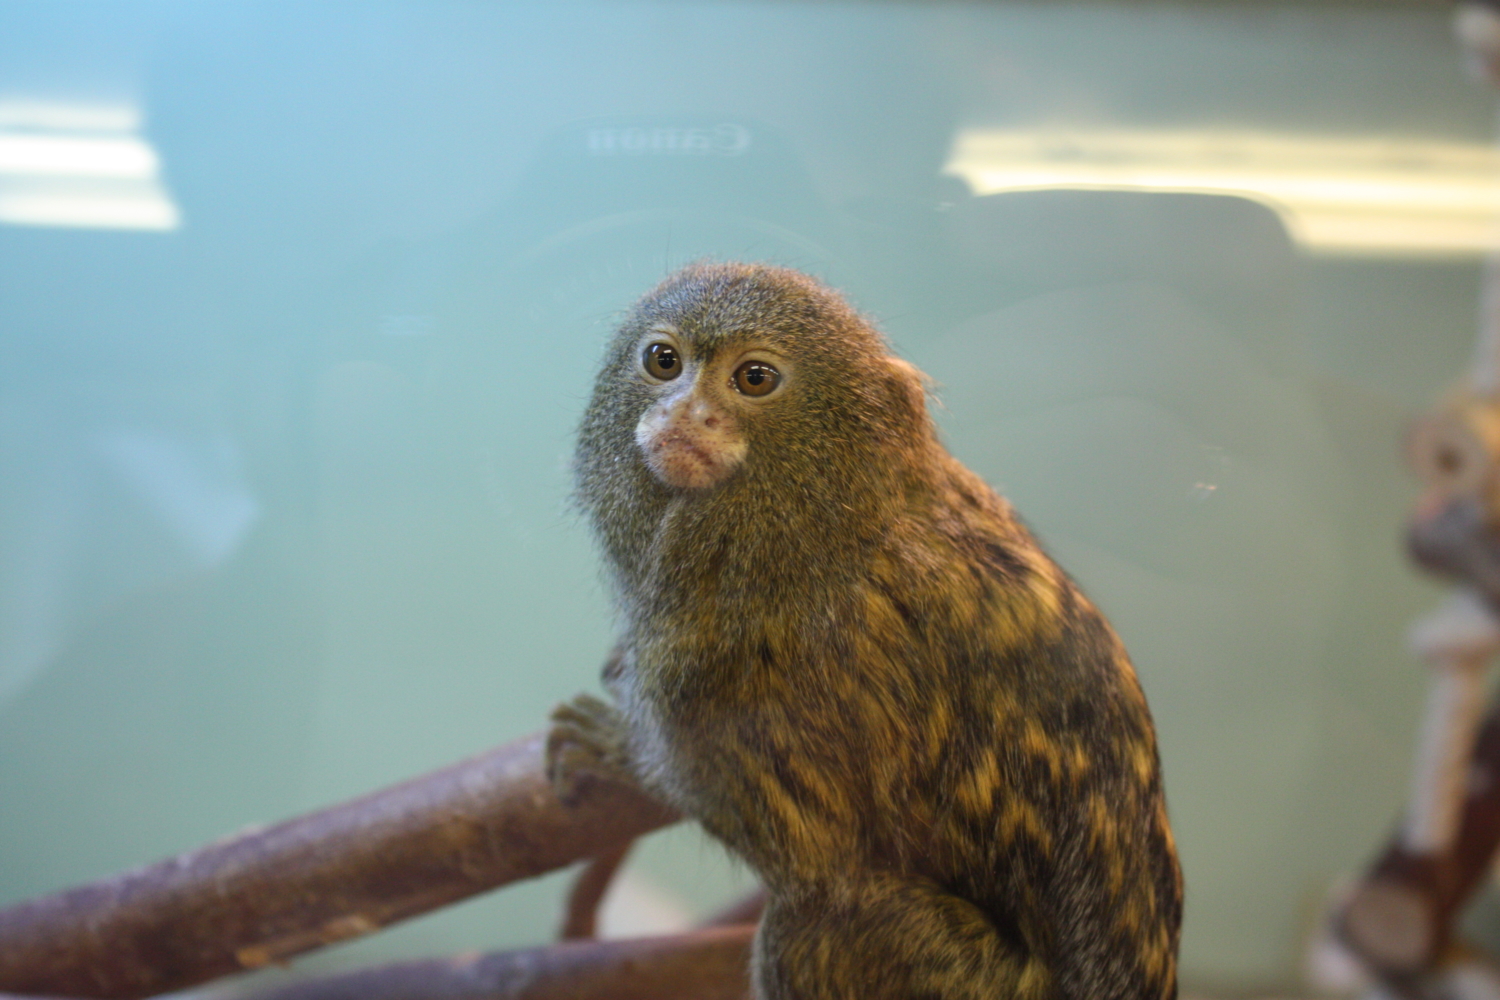 monkey is behind the glass